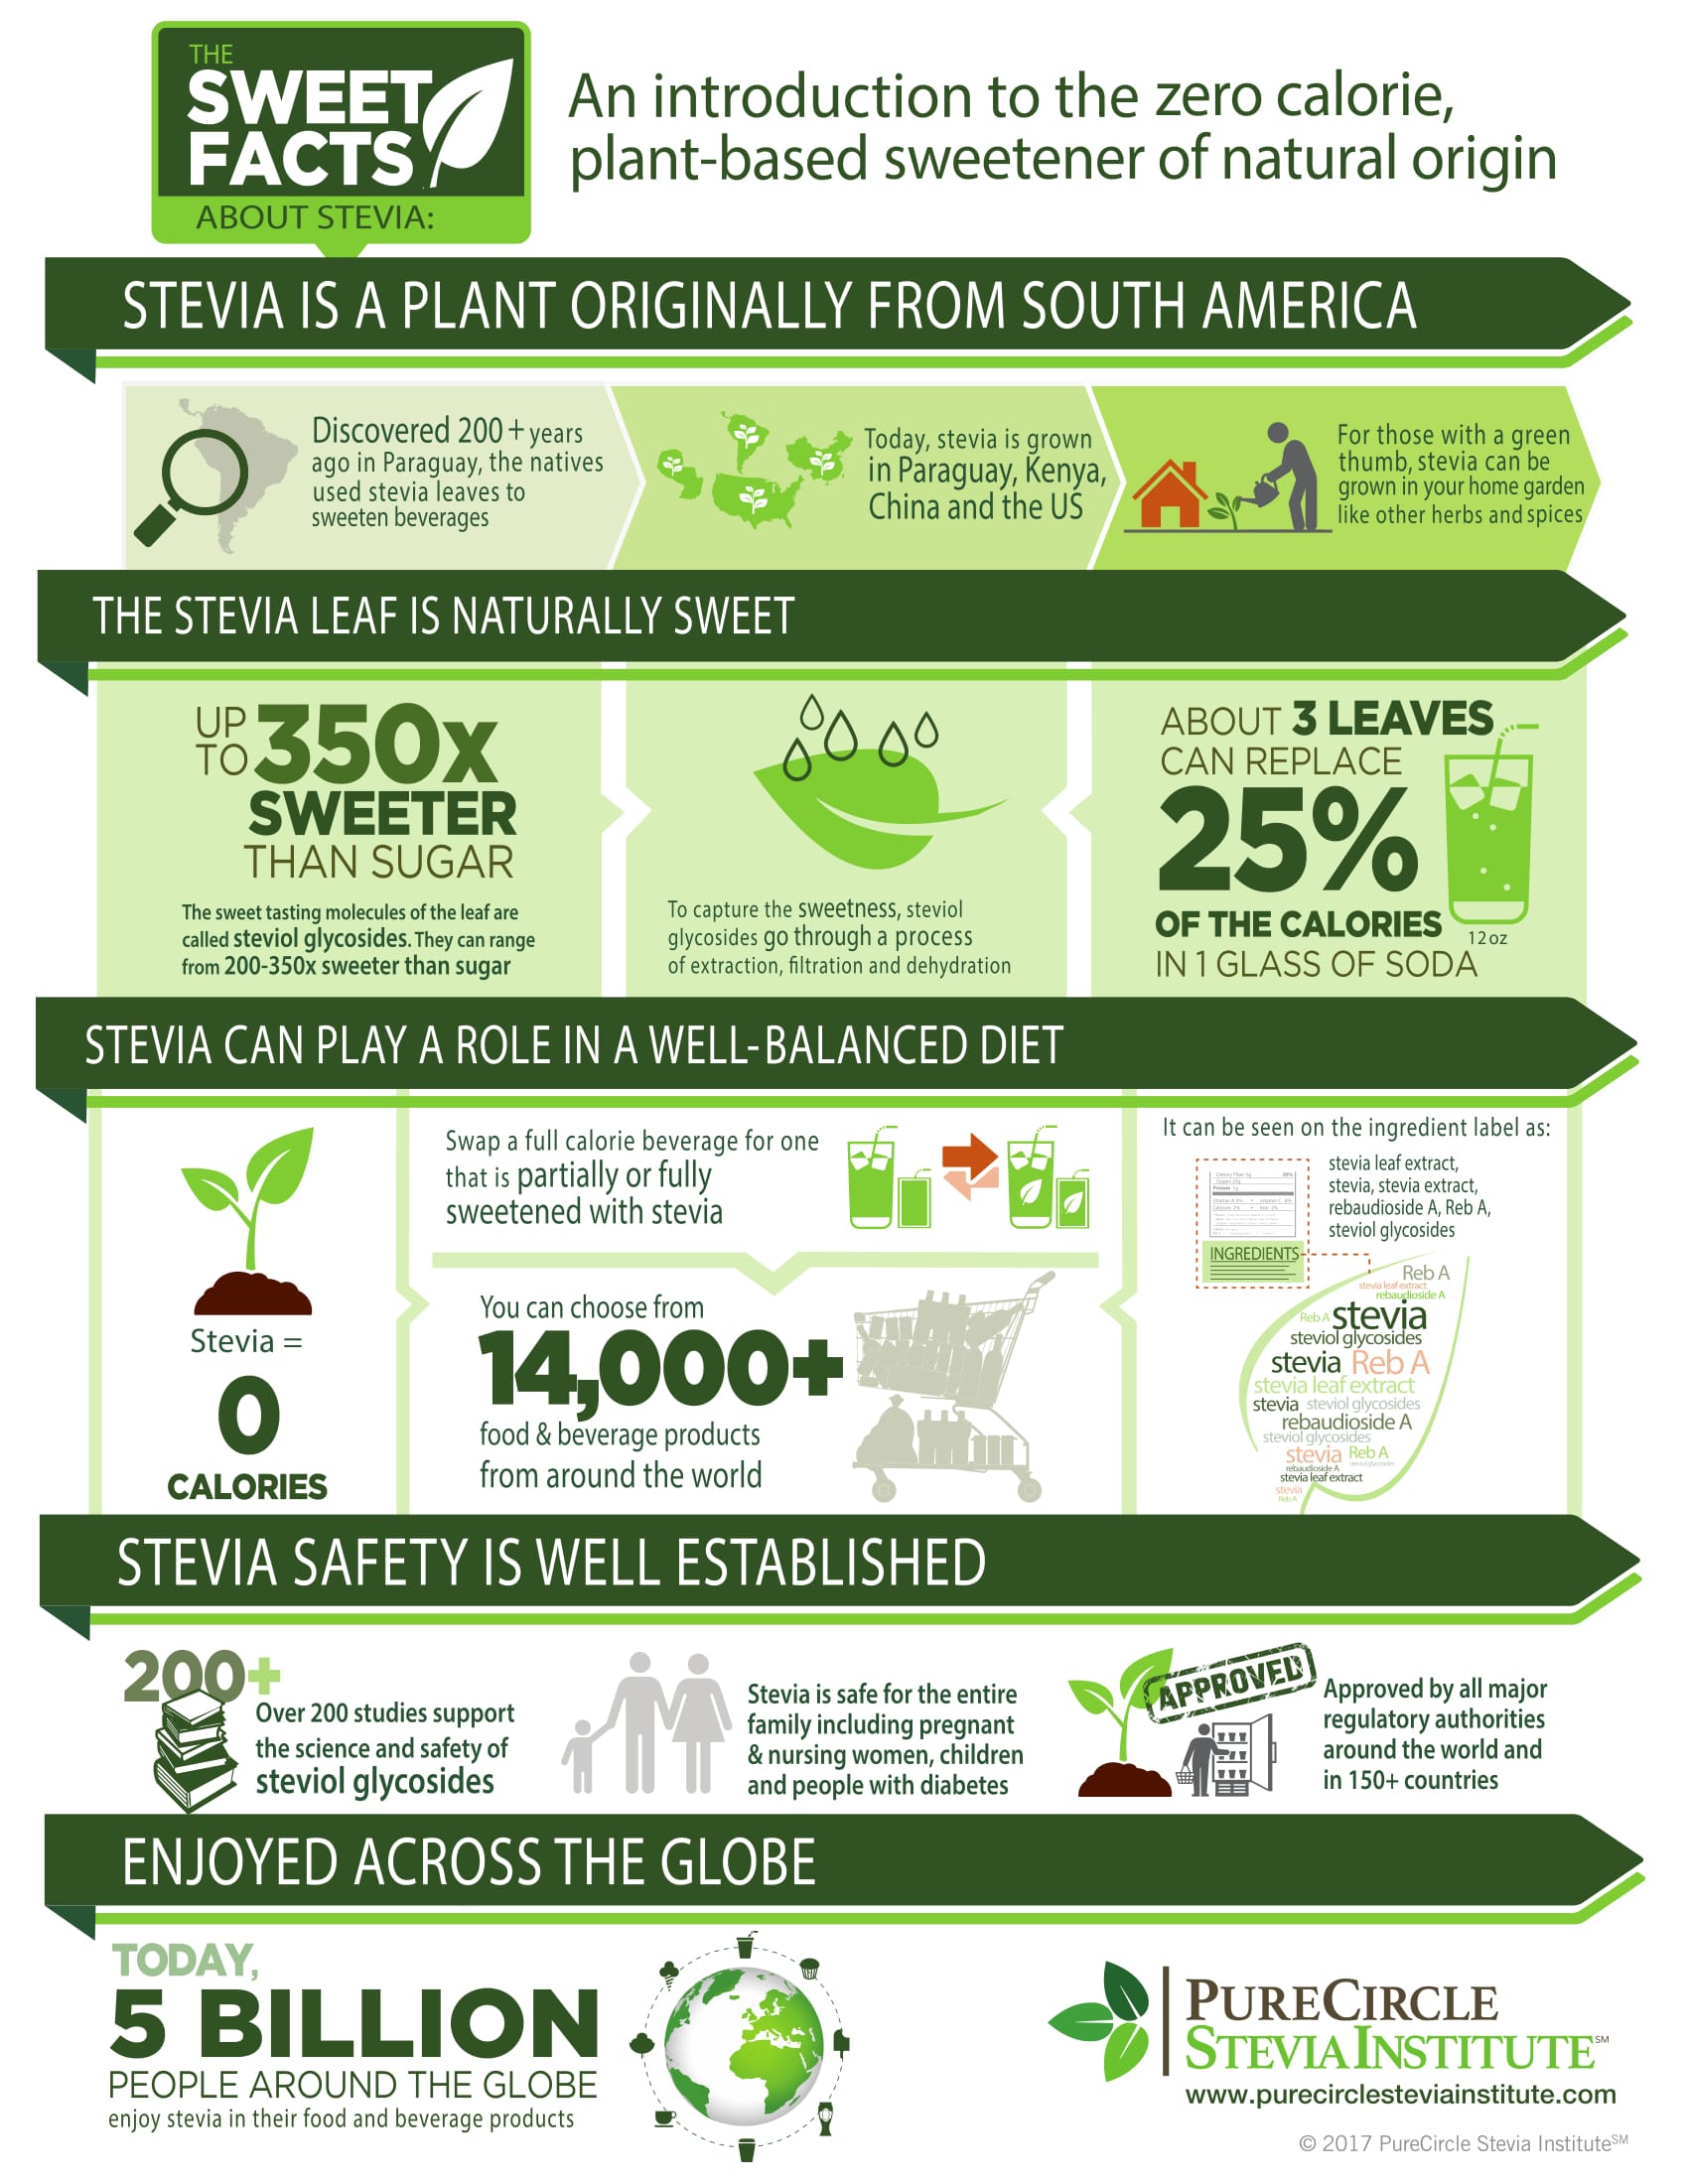 What is Stevia